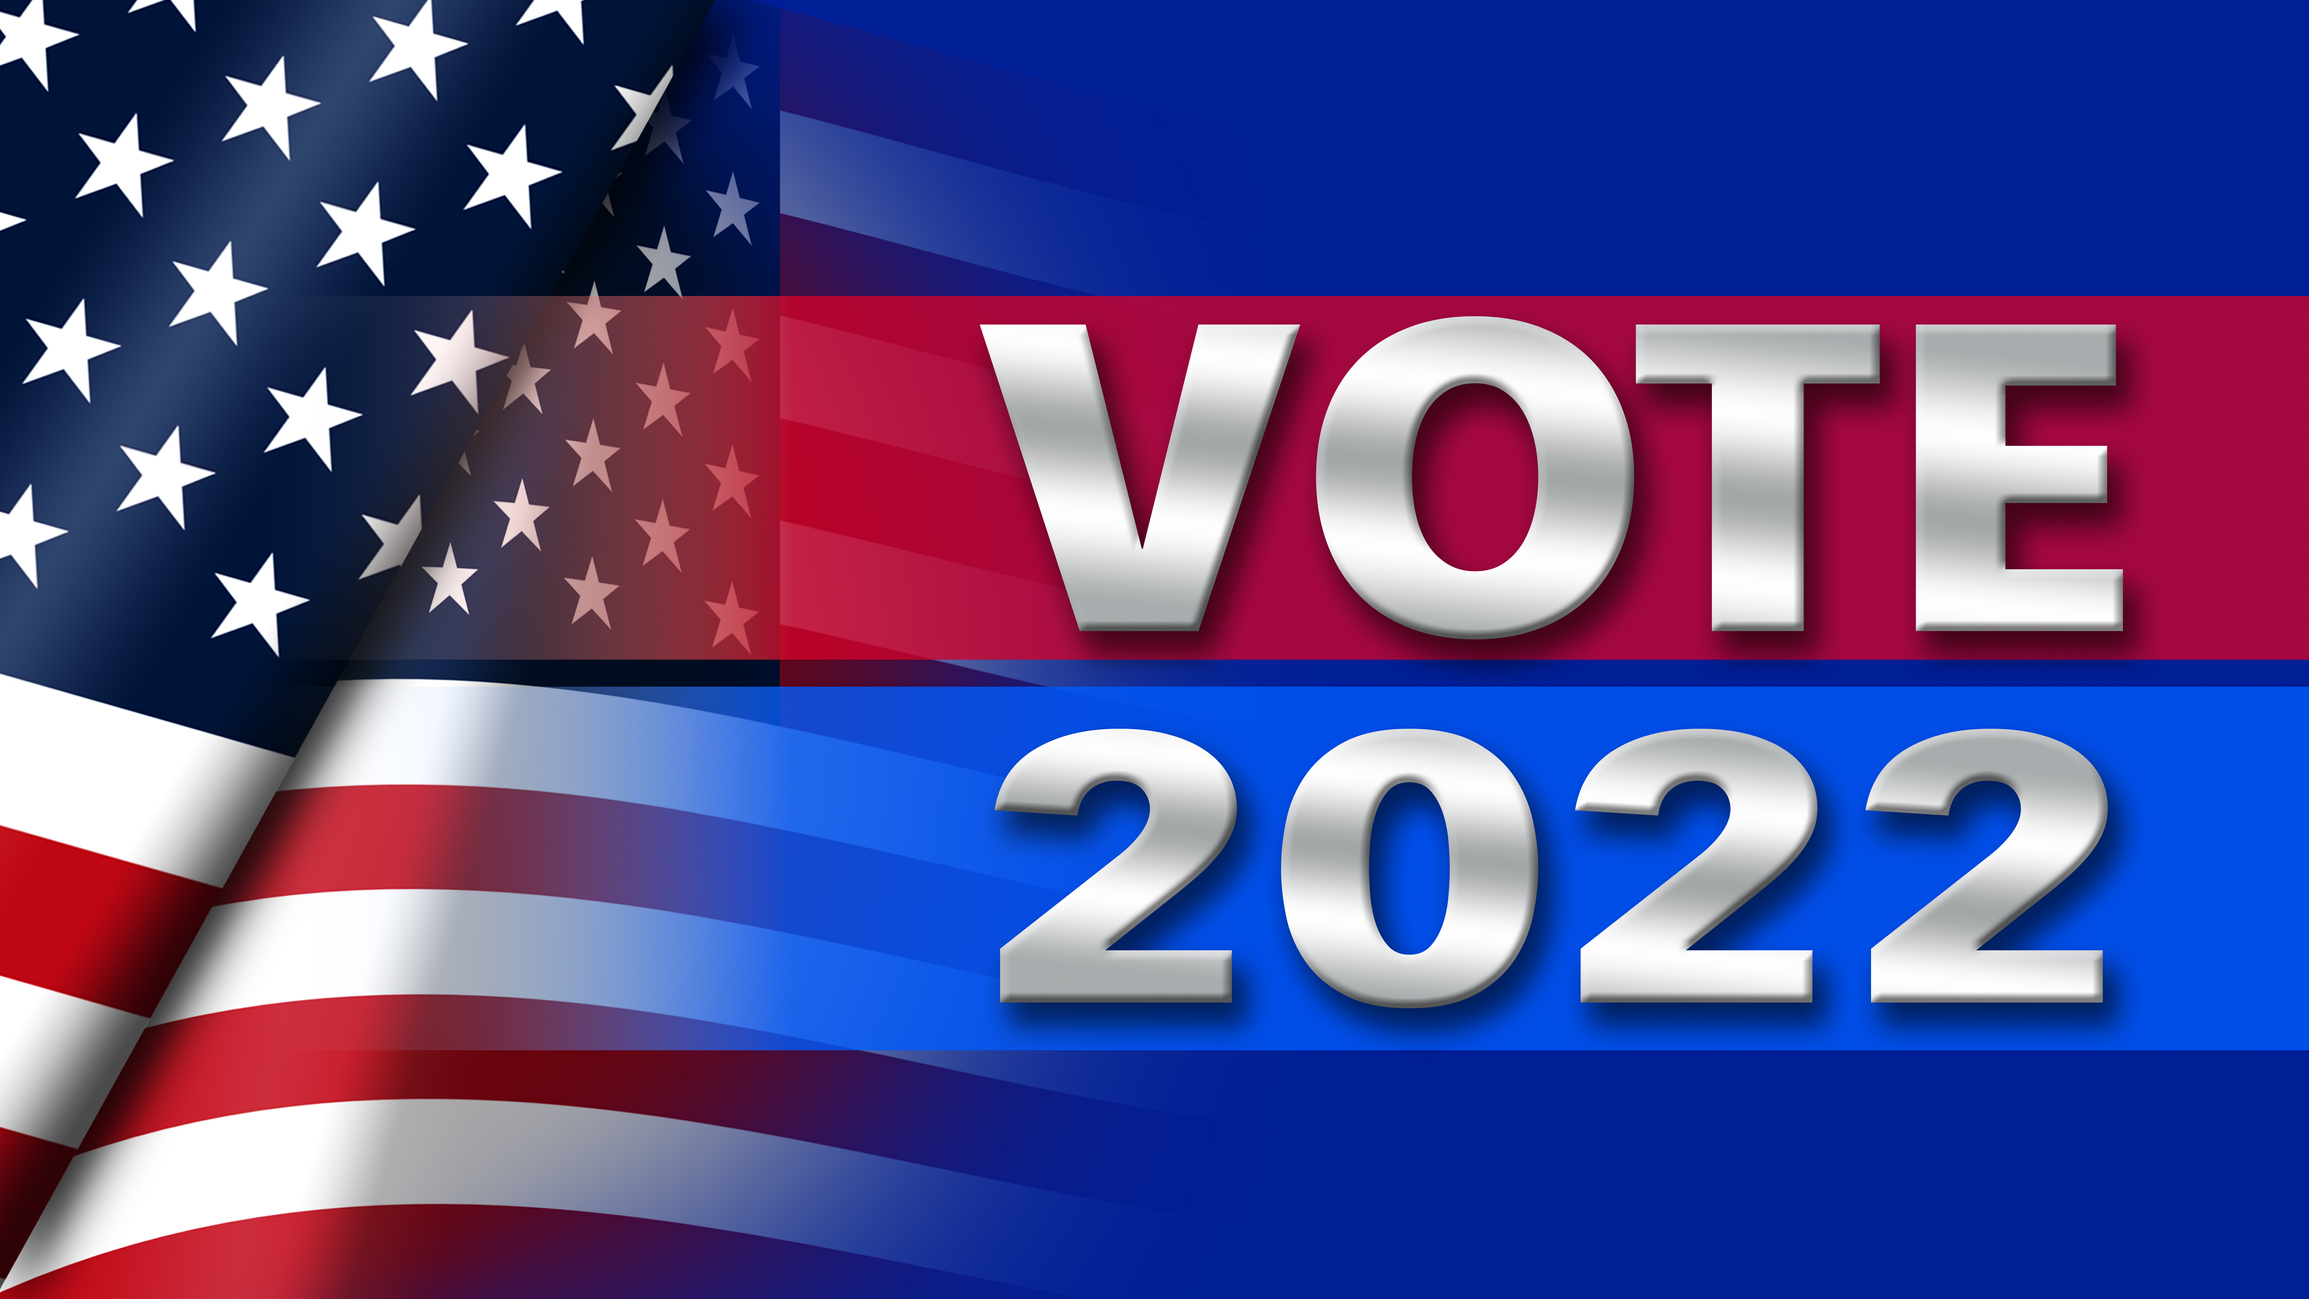 GOP Primary preview graphic: Vote 2022 with the United States of America flag election candidates